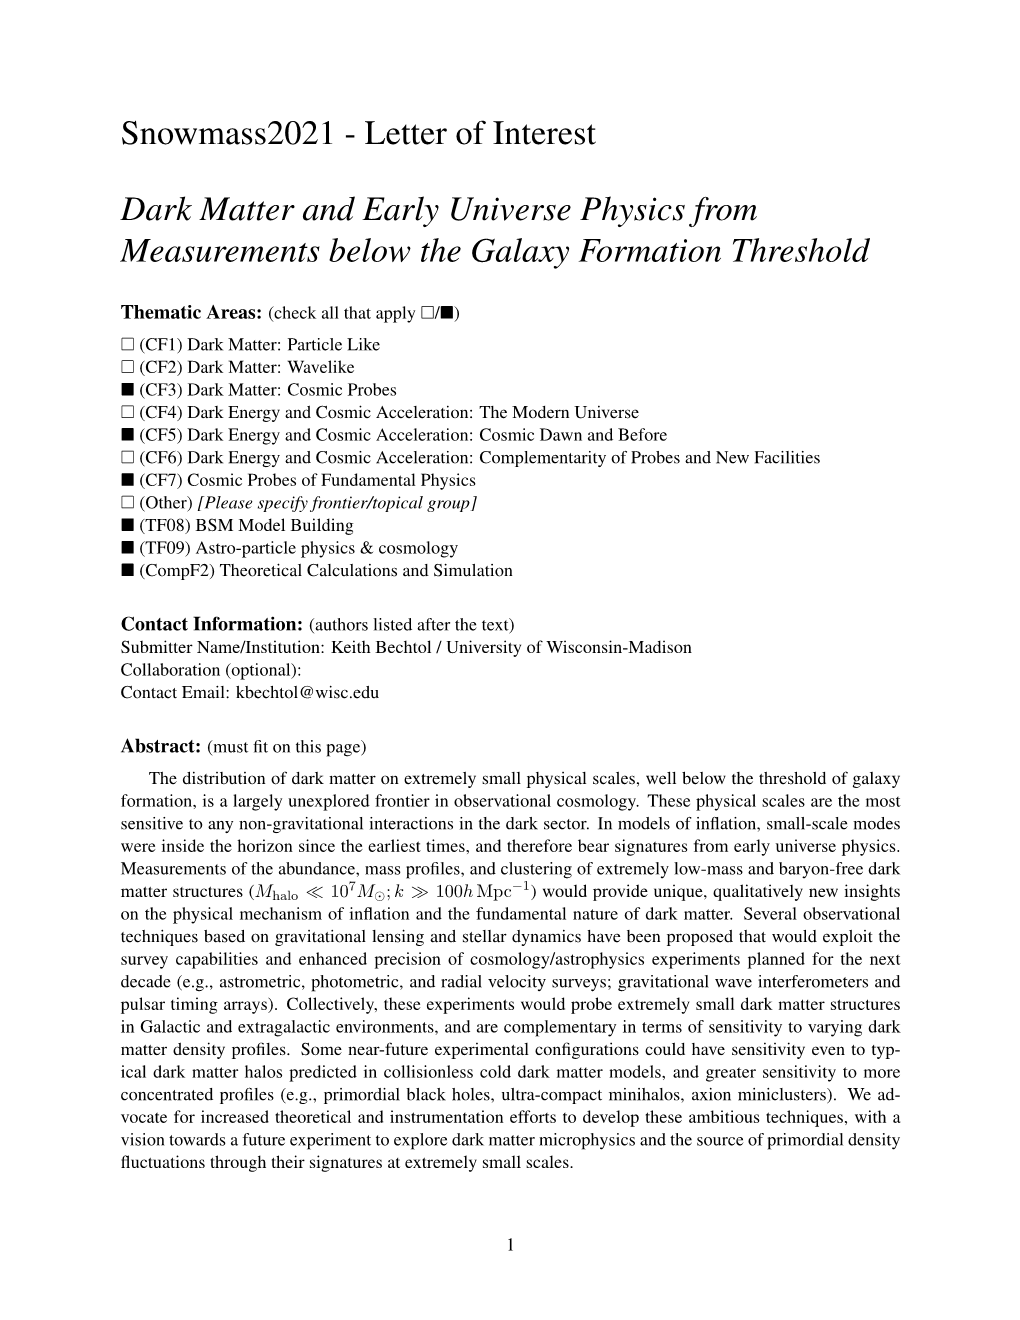 Letter of Interest Dark Matter and Early Universe Physics From